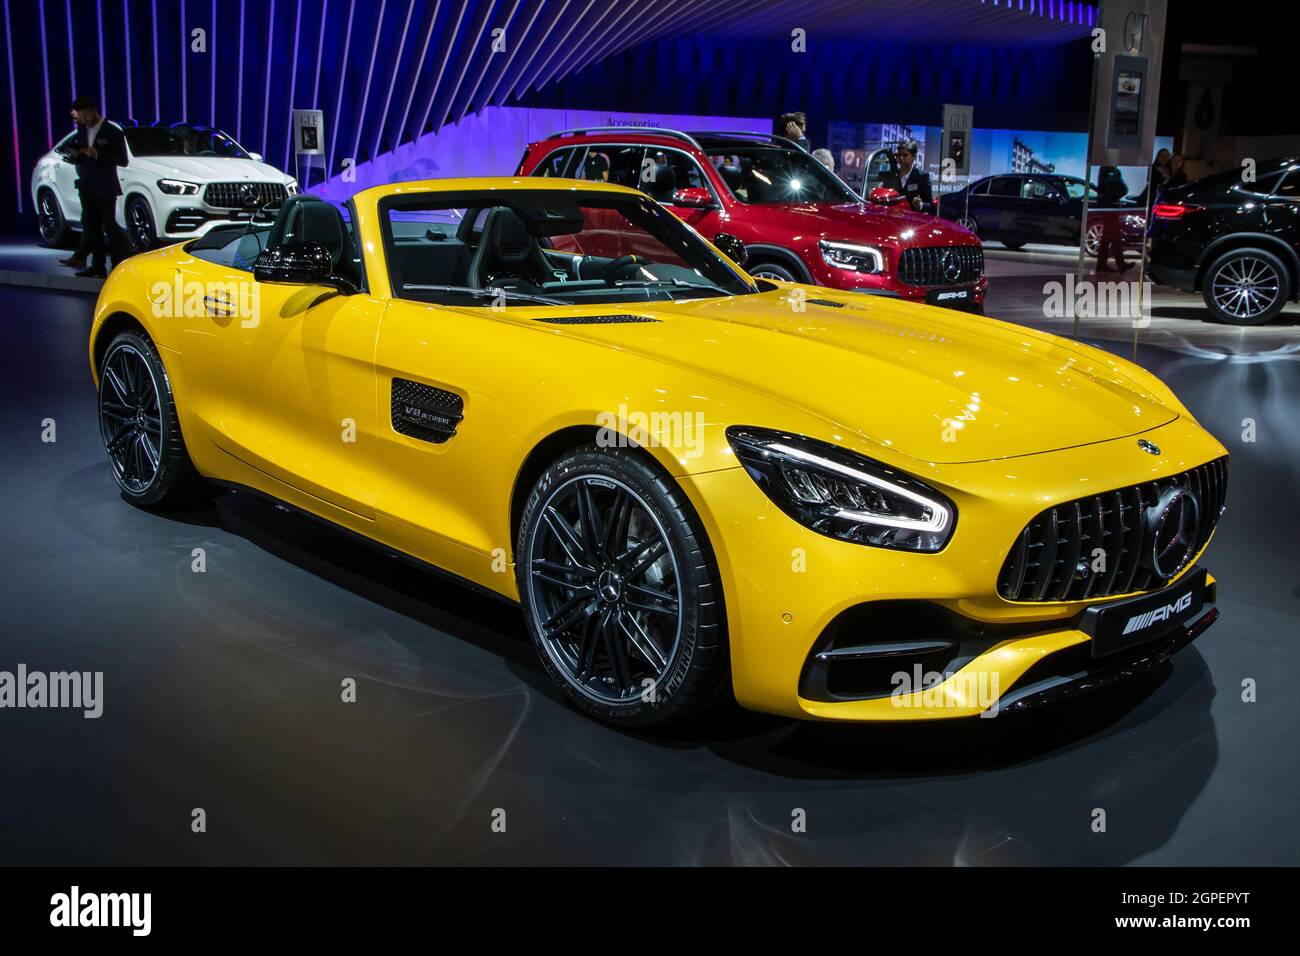 Mercedes AMG GT Roadster sports car shown at the Autosalon 2020 Motor Show. Brussels, Belgium - January 9, 2020. Stock Photo